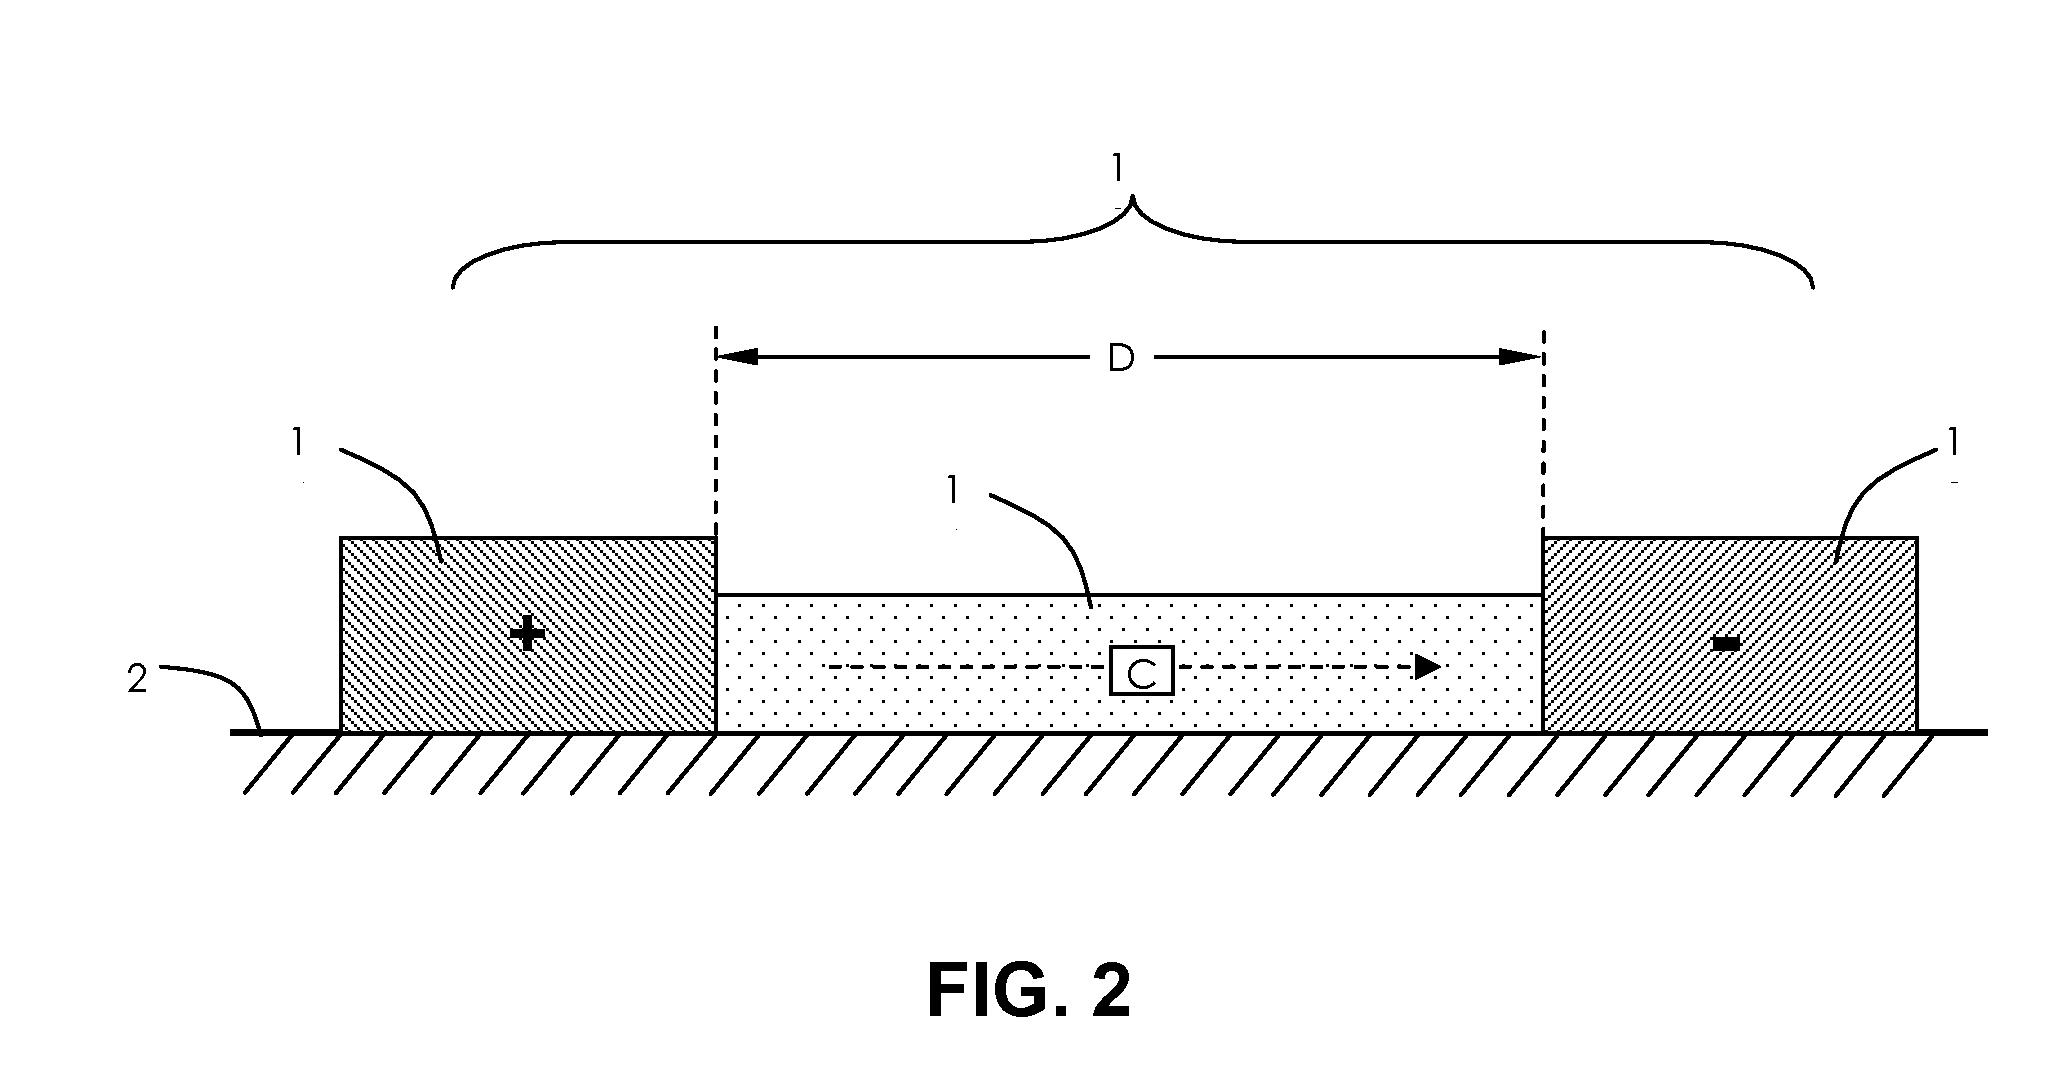 Microcurrent-generating topical or cosmetic systems, and methods of making and using the same